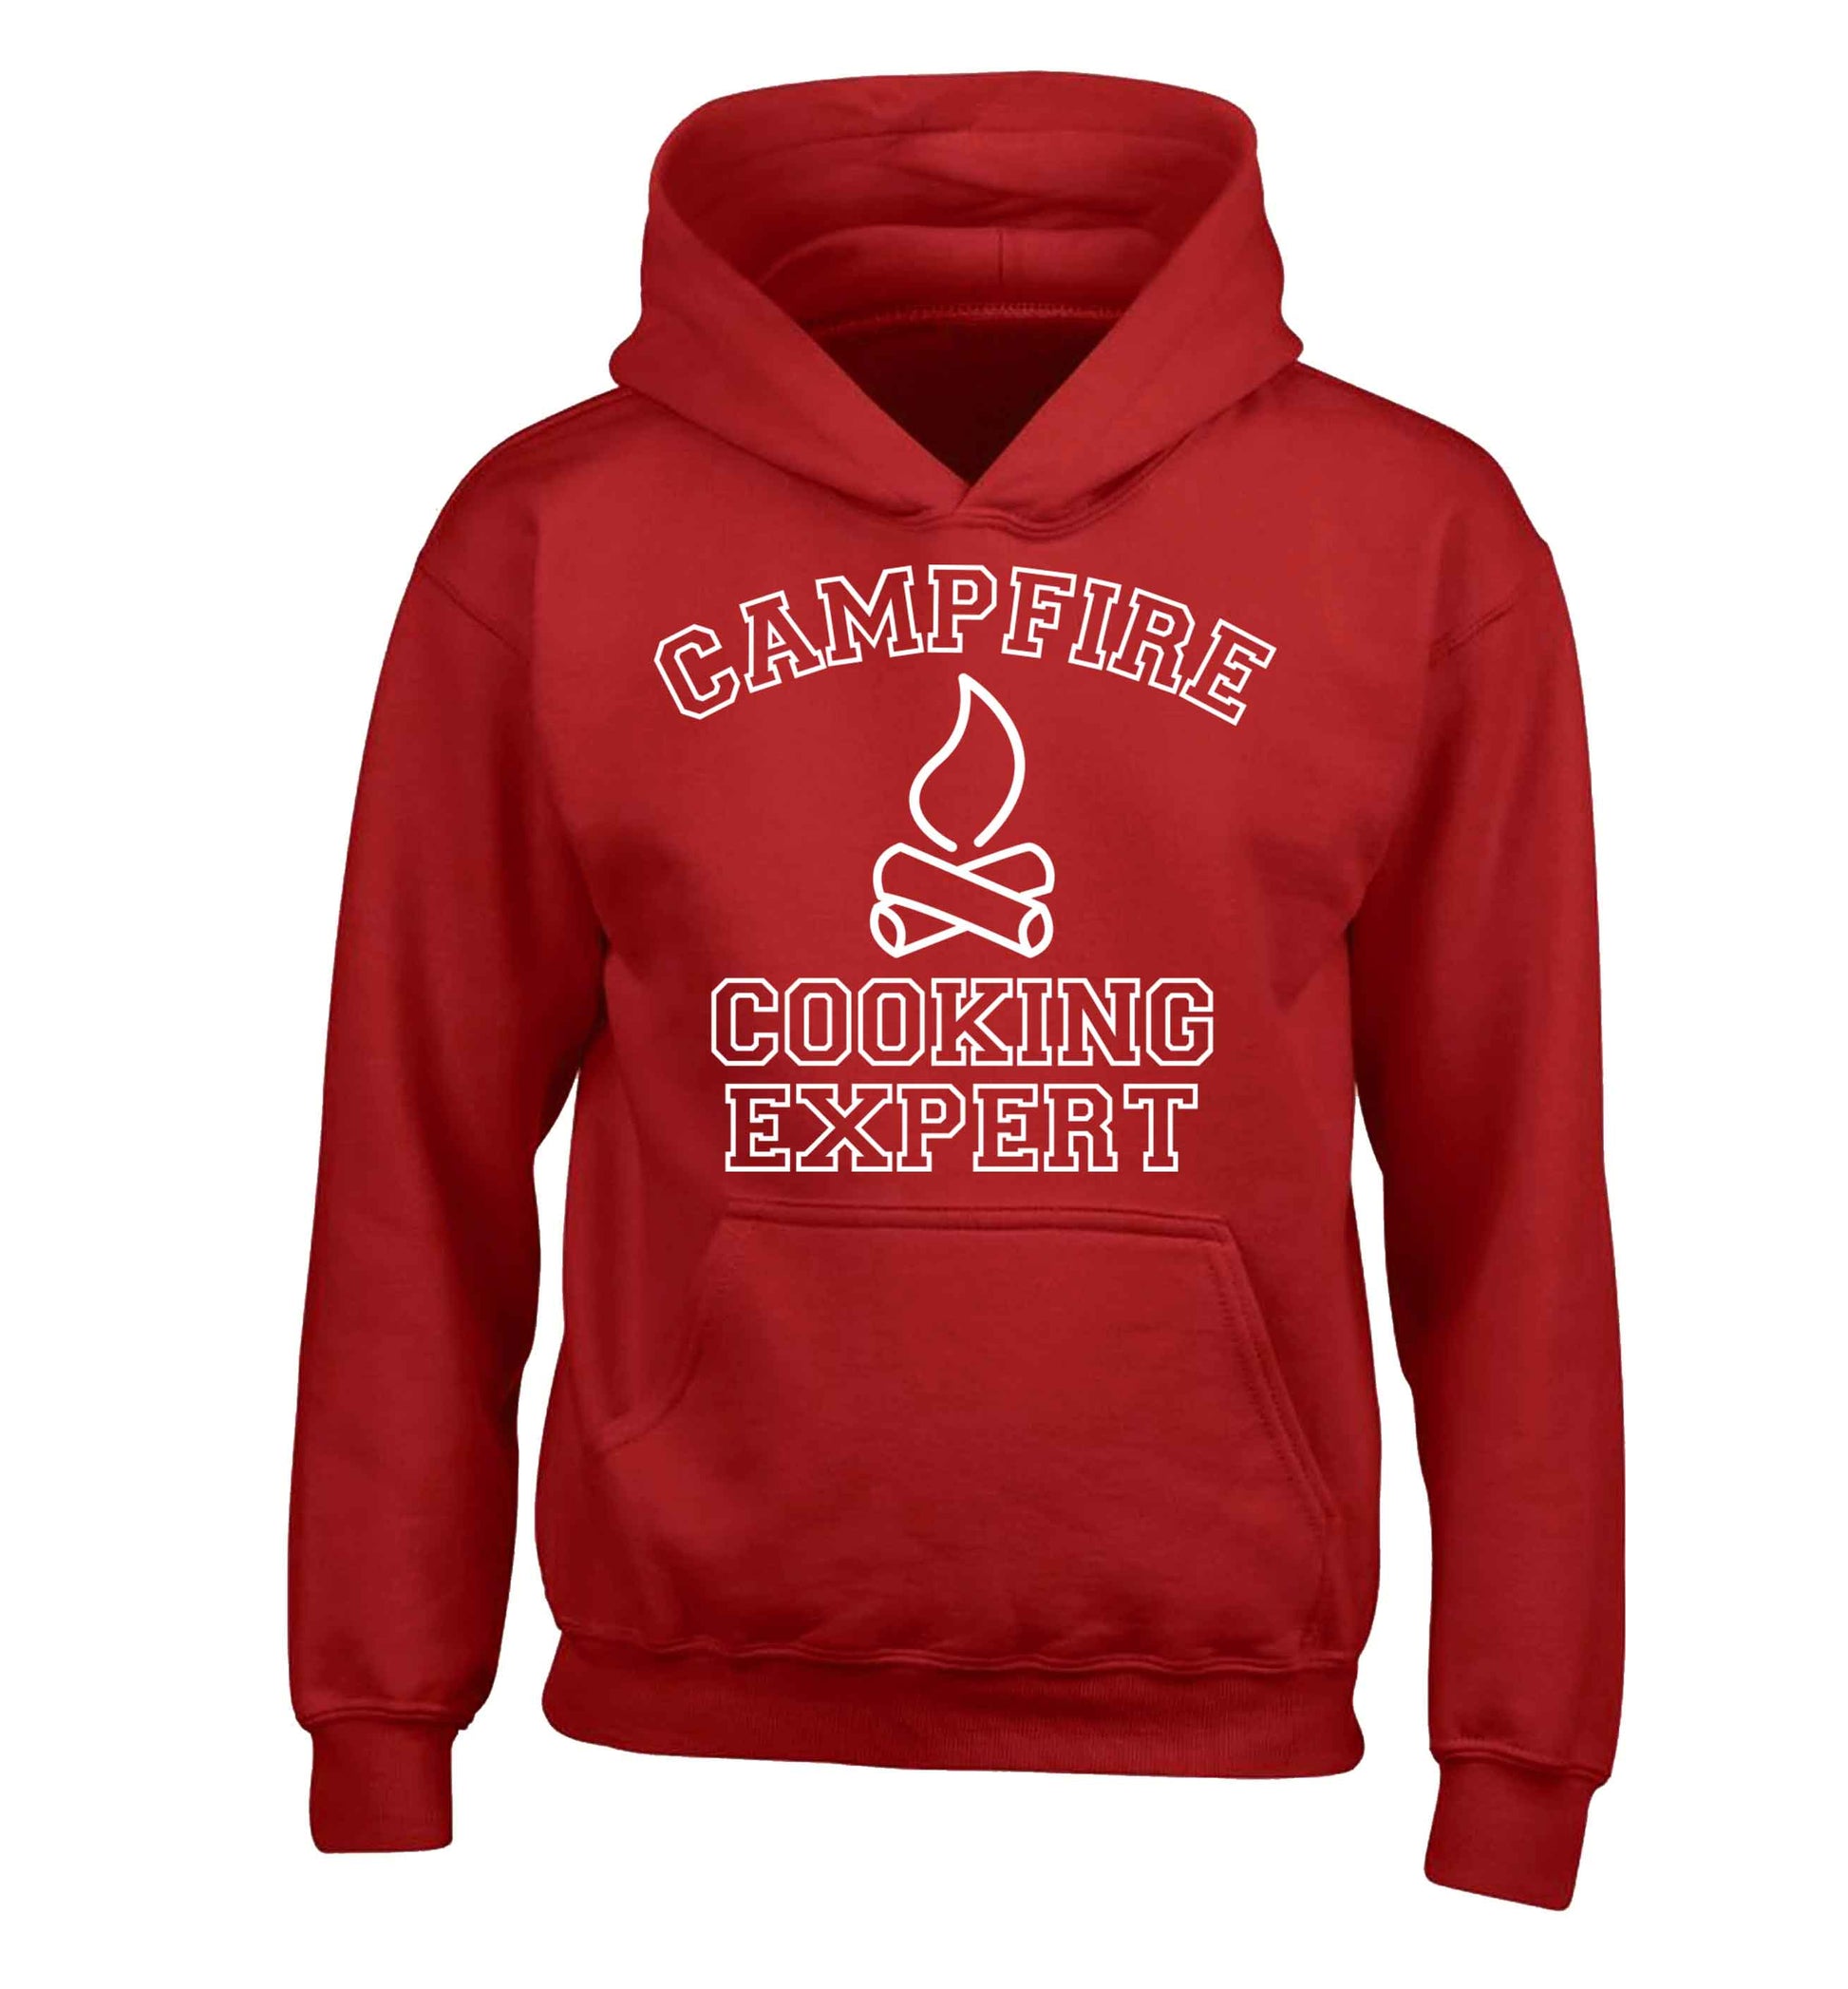 Campfire cooking expert children's red hoodie 12-13 Years